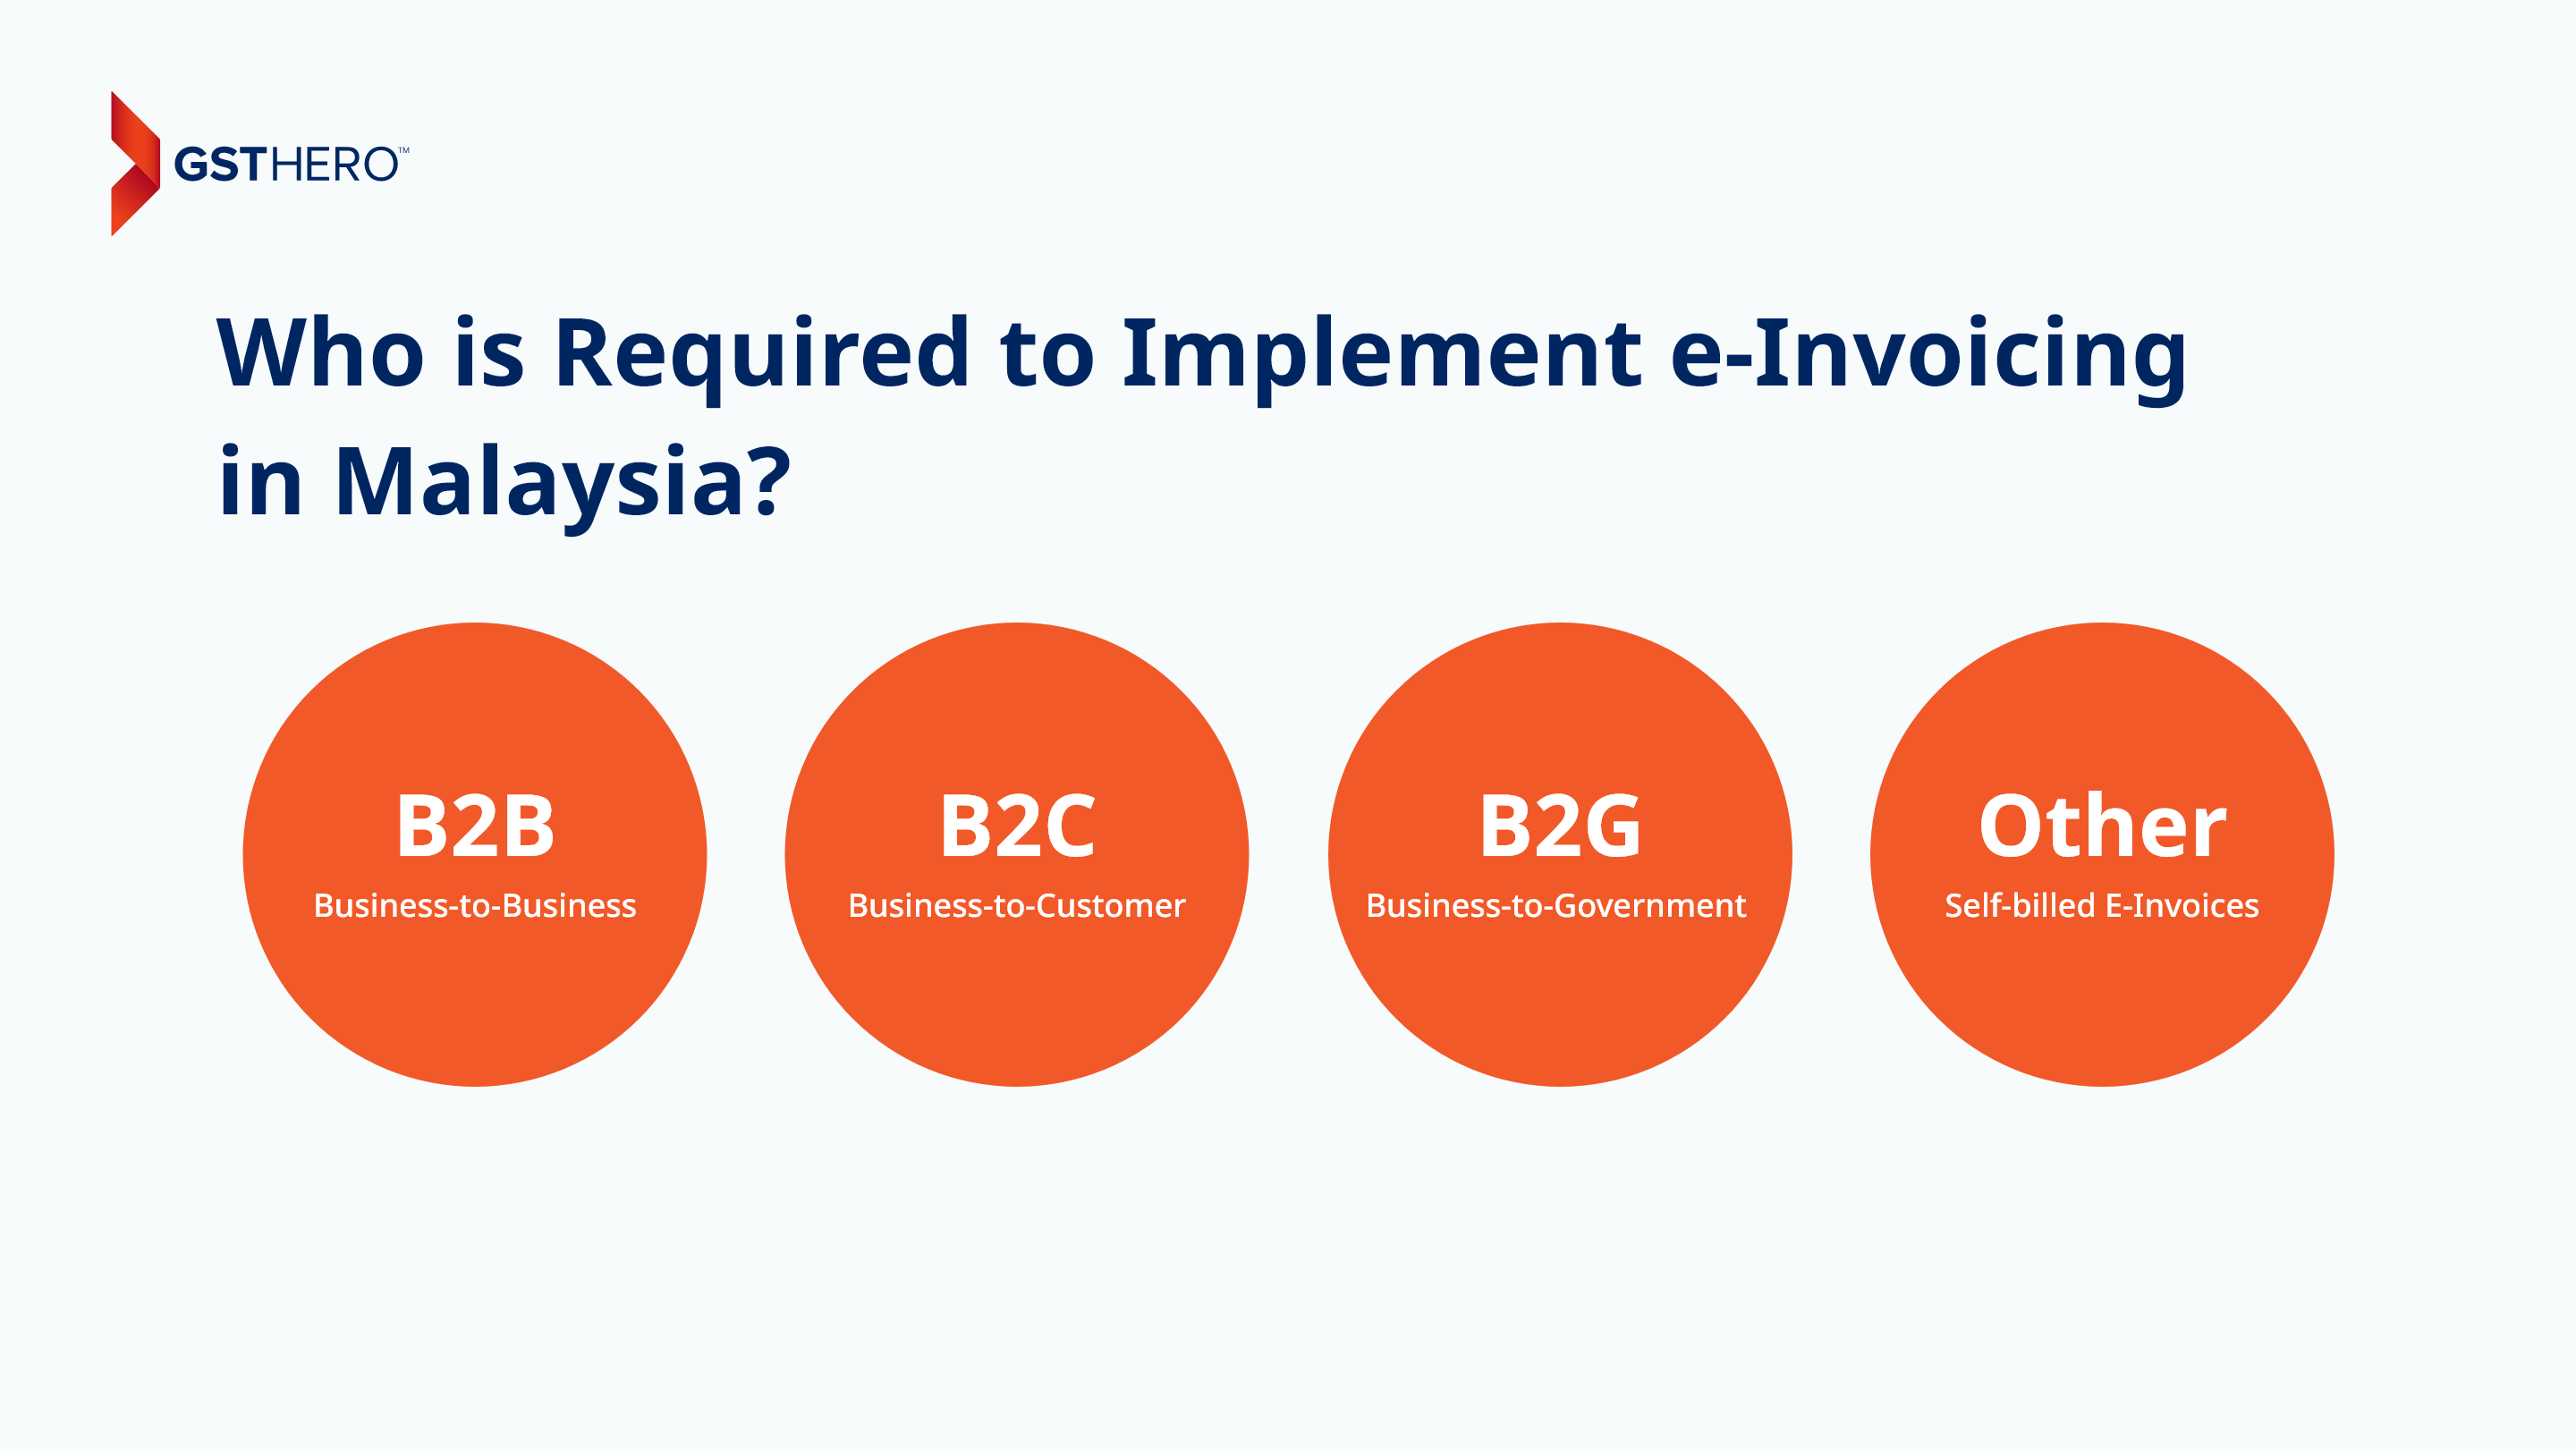 Who is Required to Implement e-Invoicing in Malaysia